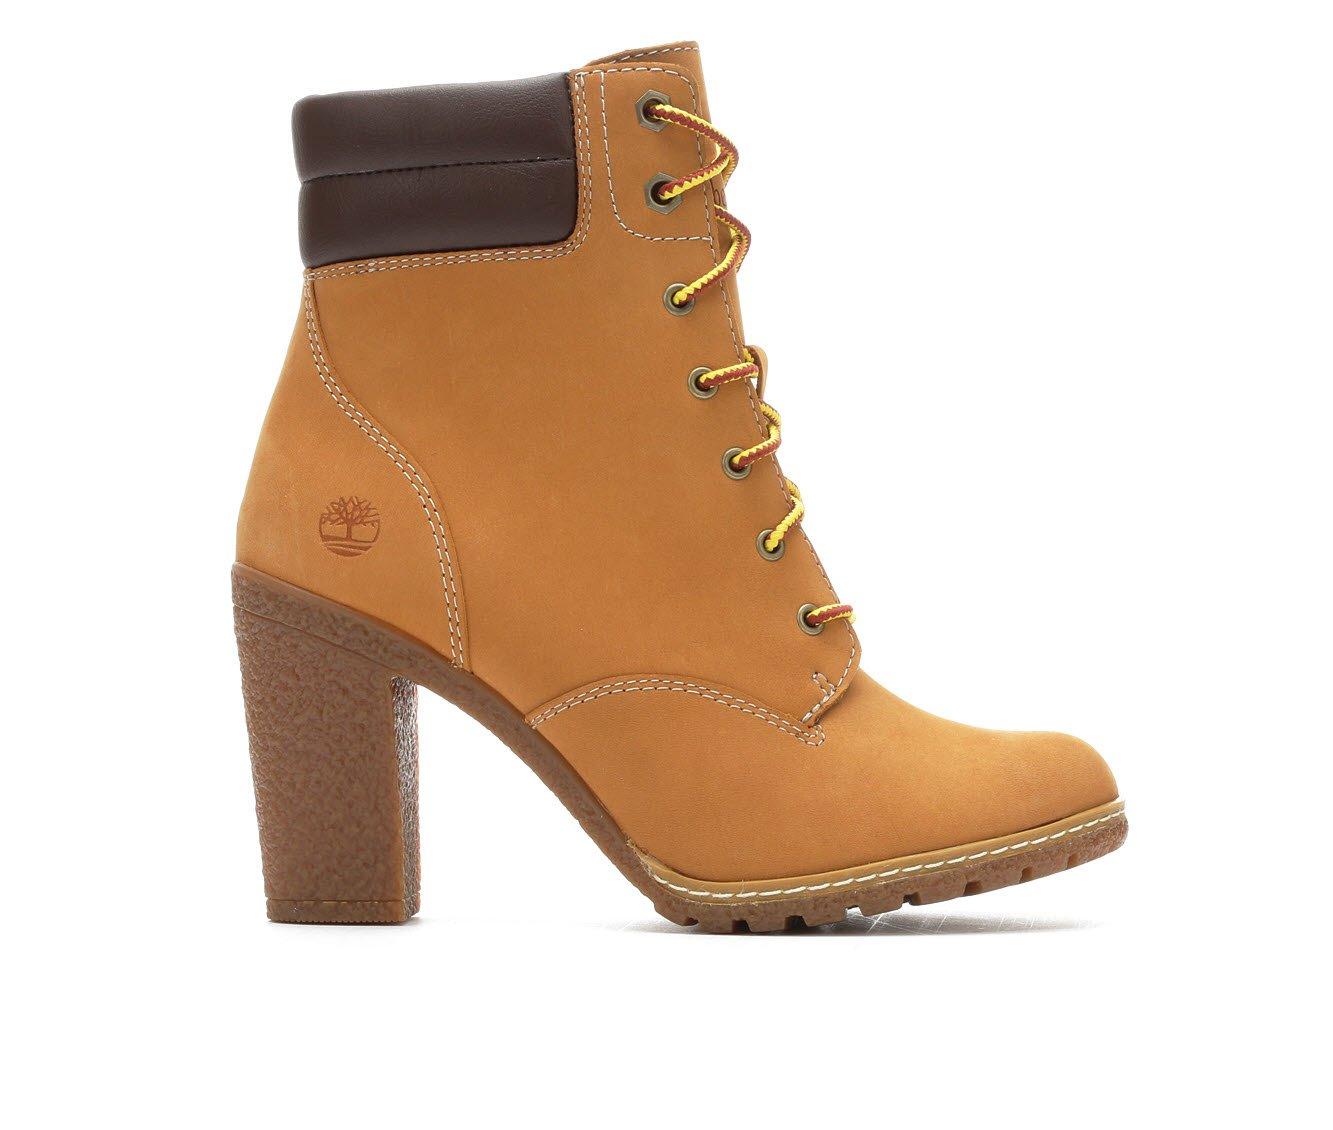 Women's Timberland Shoes & Boots | Shoe